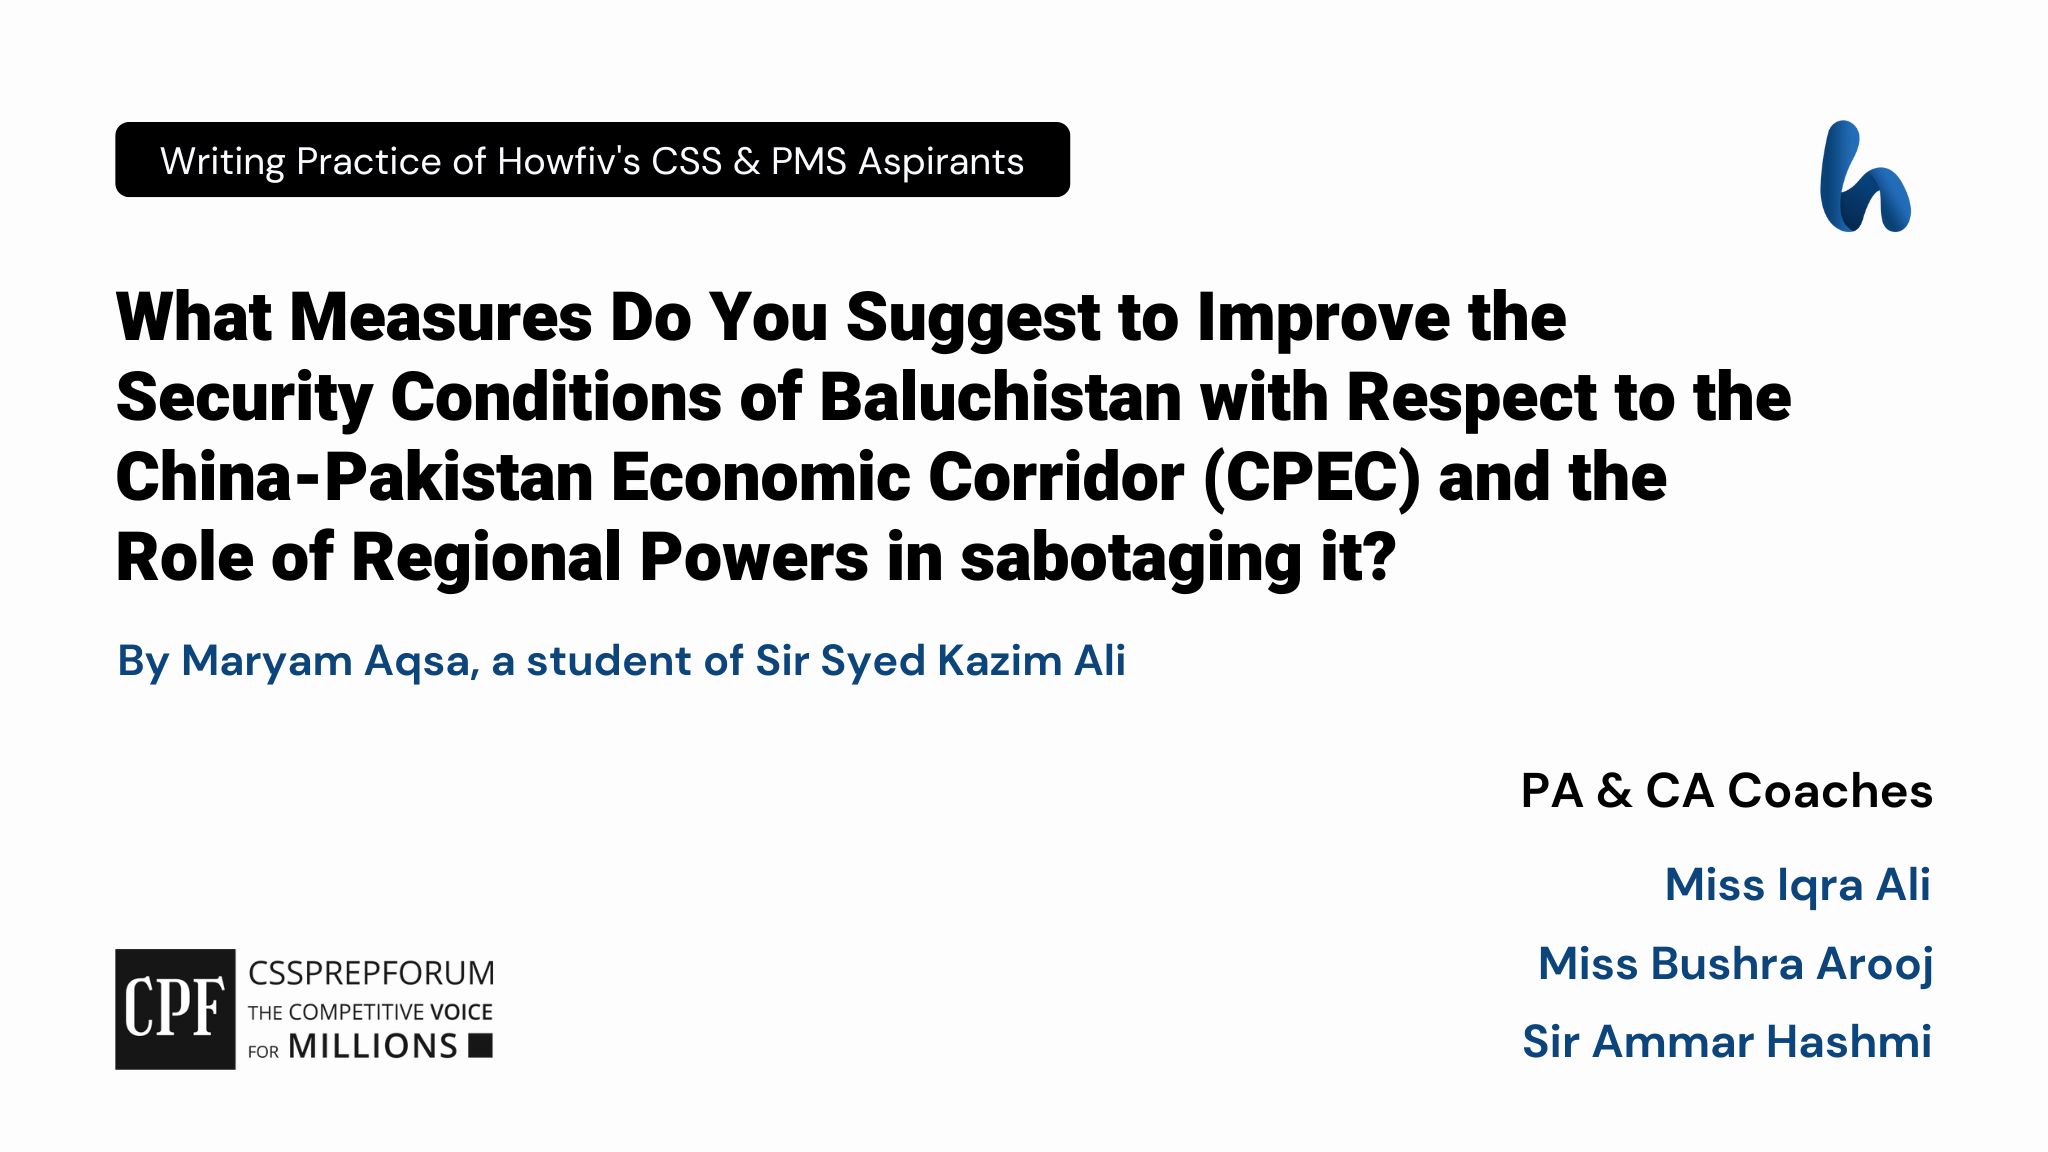 CSS Current Affairs article, "Suggestion to Improve Security of Baluchistan with Respect to CPEC" is written by Maryam Aqsa under the supervision of Miss Iqra Ali...